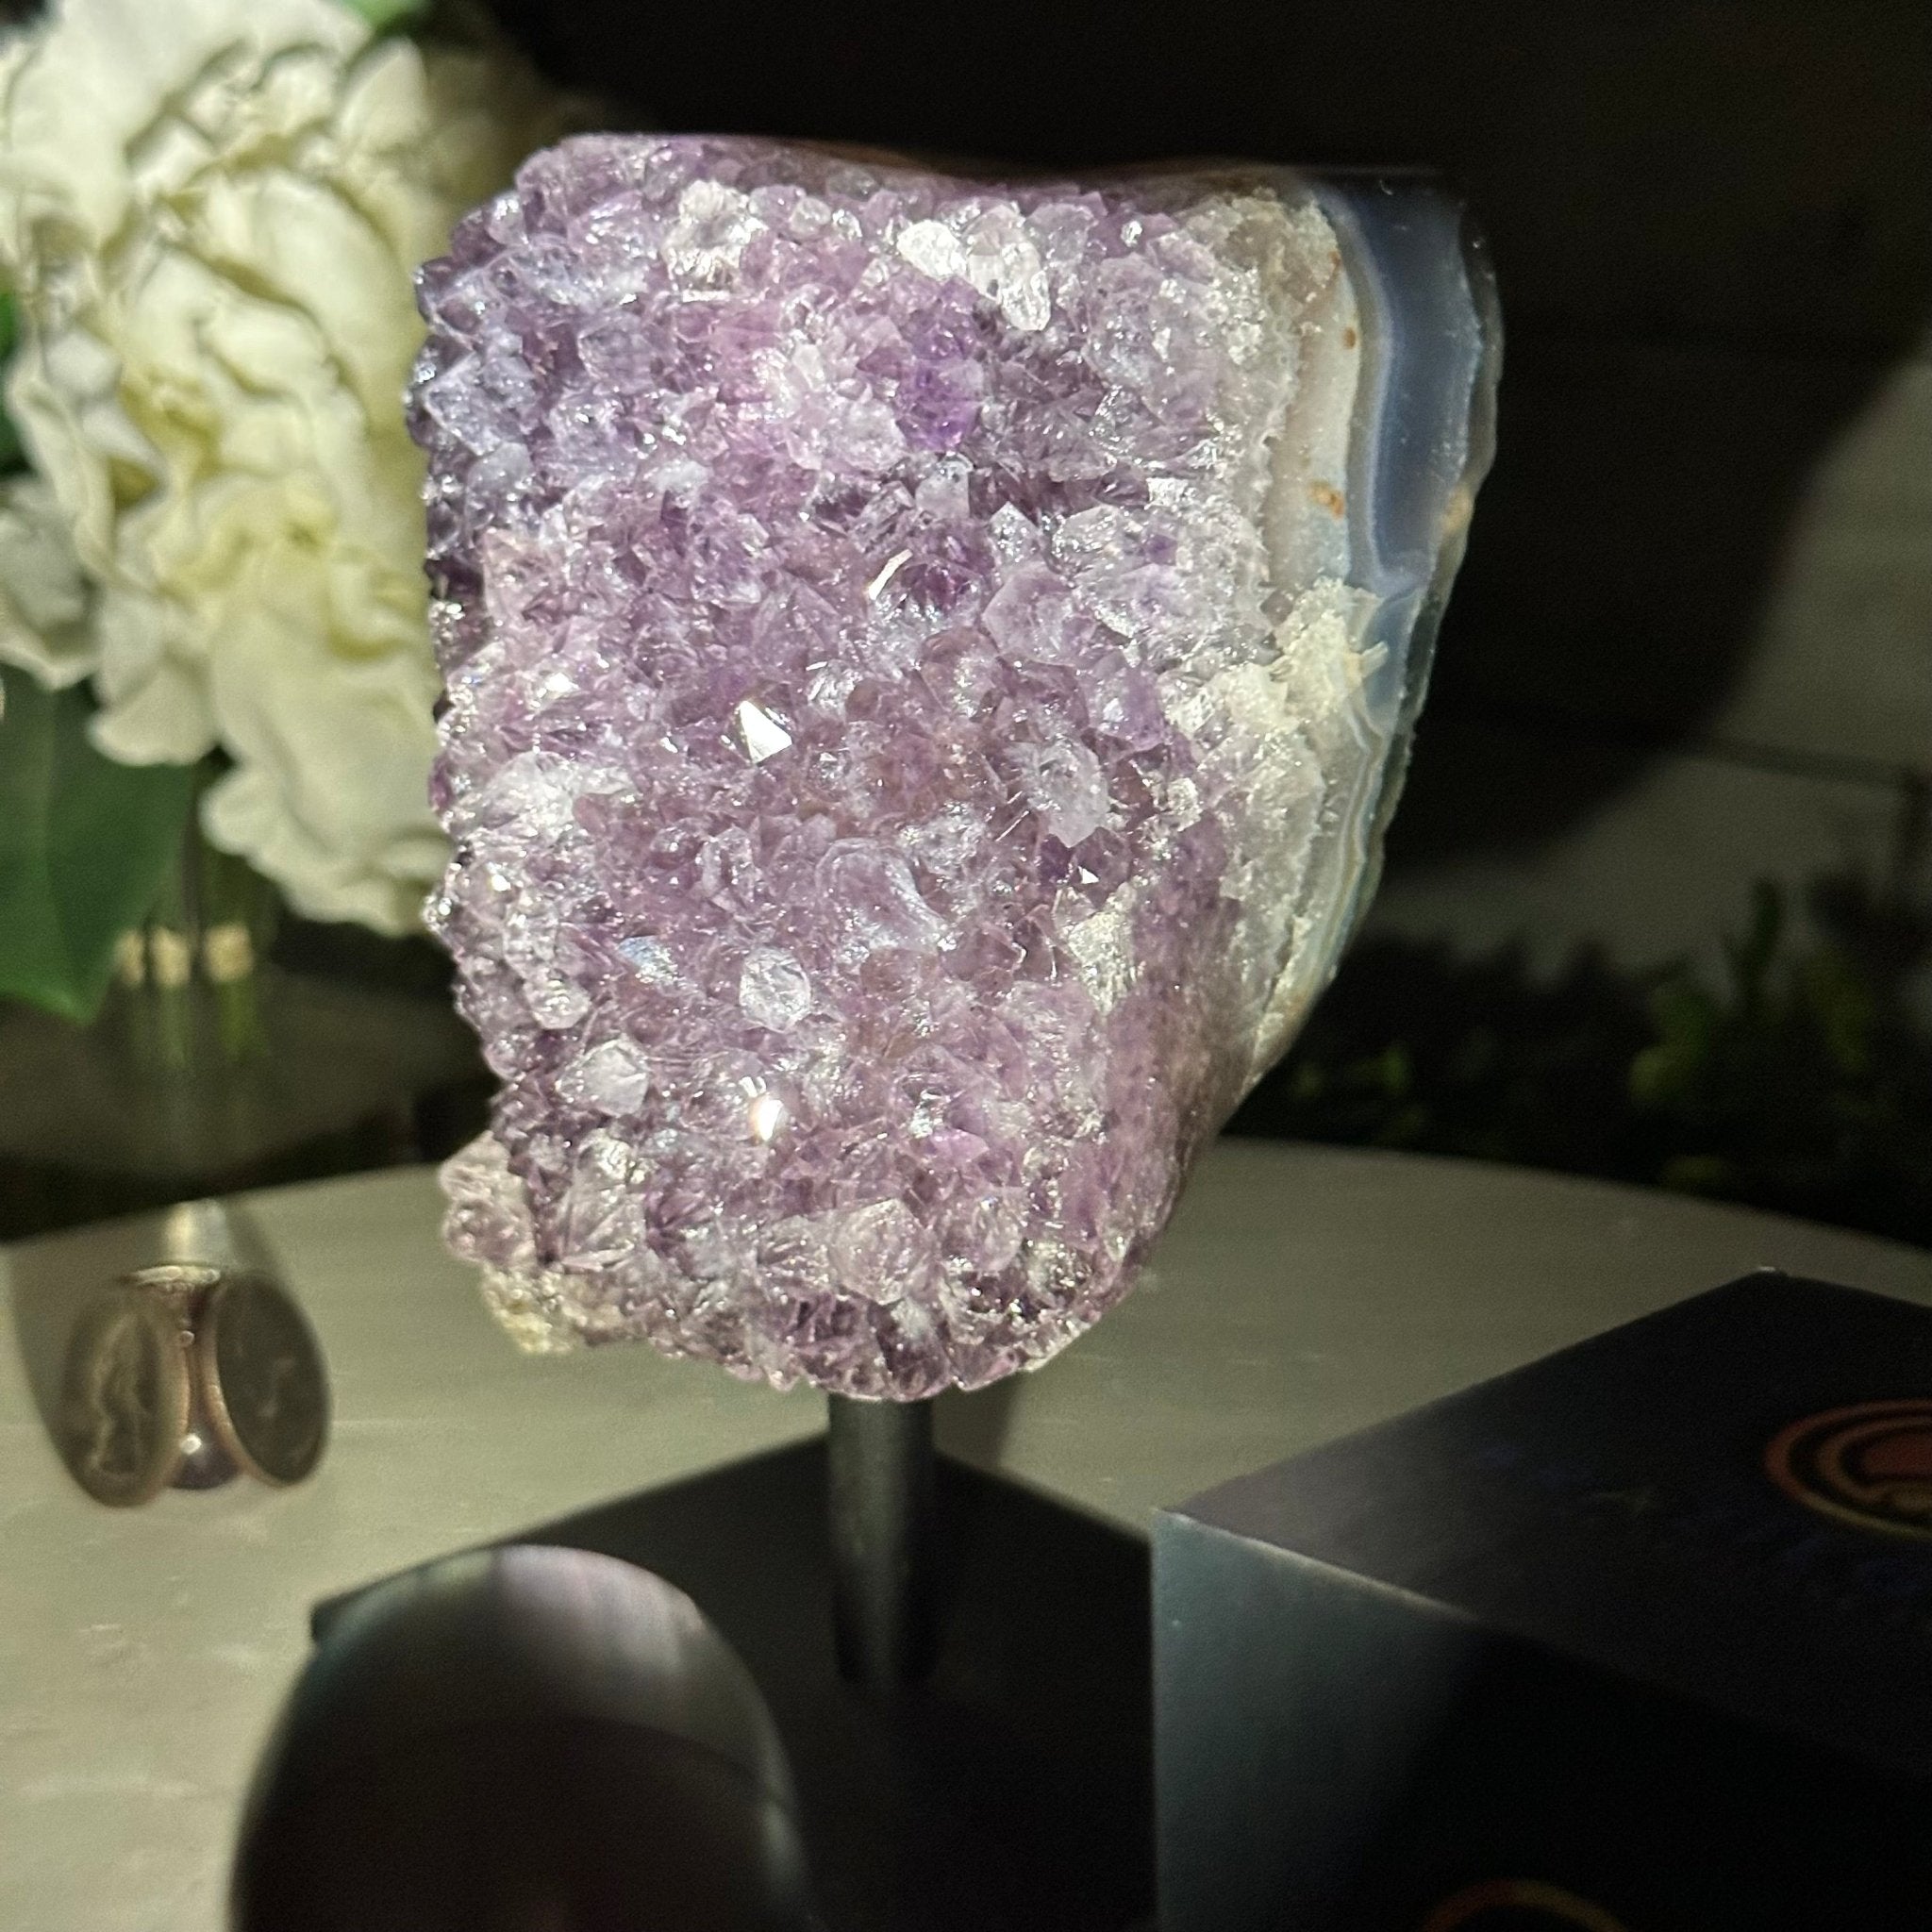 Extra Quality Amethyst Cluster on a Metal Base, 3.3 lbs & 5.7" Tall #5491-0130 - Brazil GemsBrazil GemsExtra Quality Amethyst Cluster on a Metal Base, 3.3 lbs & 5.7" Tall #5491-0130Clusters on Fixed Bases5491-0130